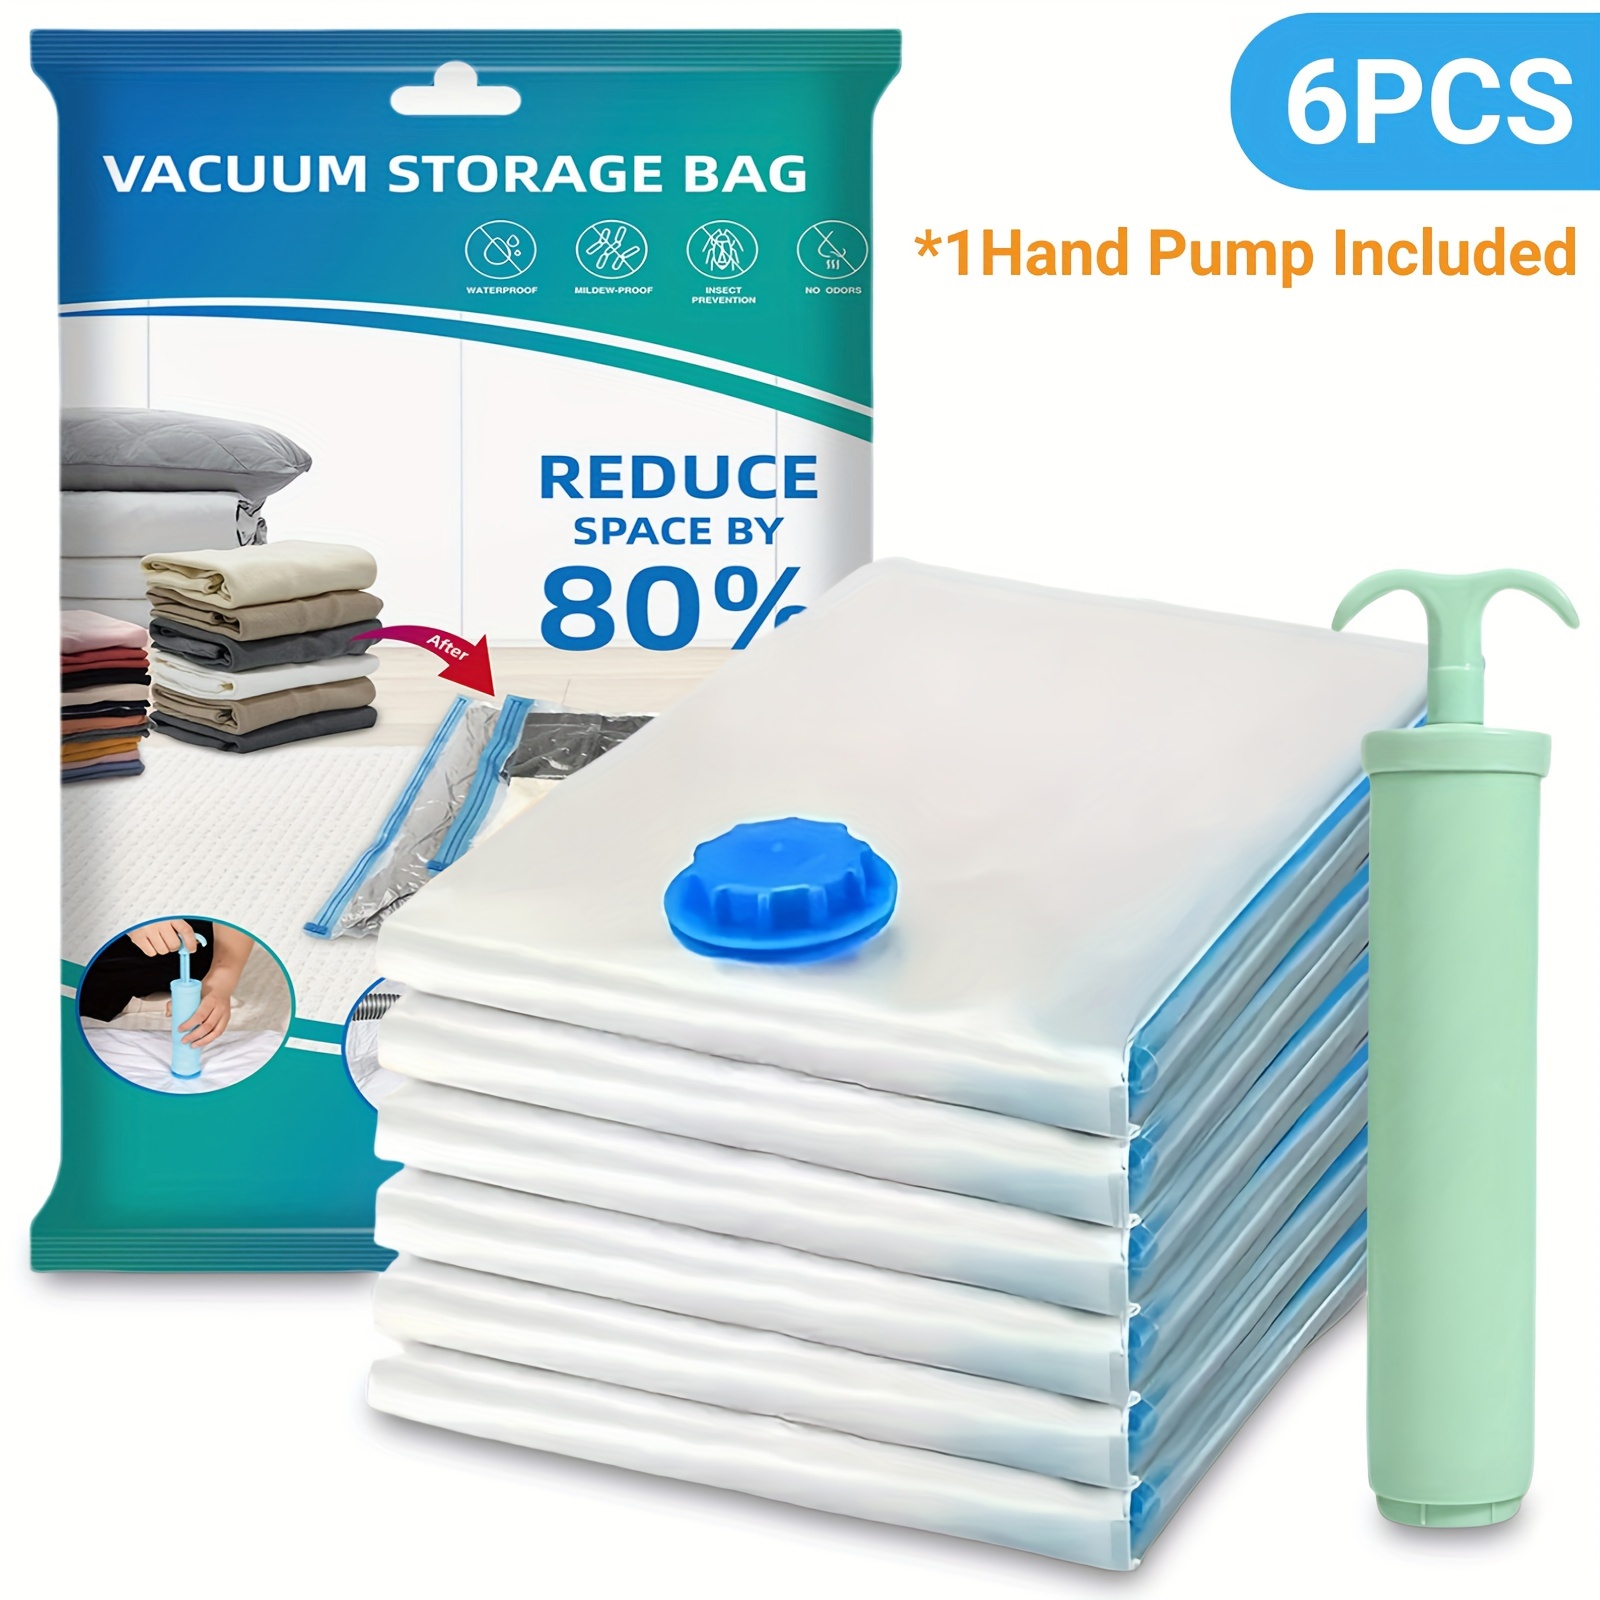 

6-piece Vacuum Storage Bags With Hand Pump - Space Saver For Quilts, Blankets & Clothes, Zip Closure, No Power Needed Storage Bags With Zipper Reusable Ziplock Bags